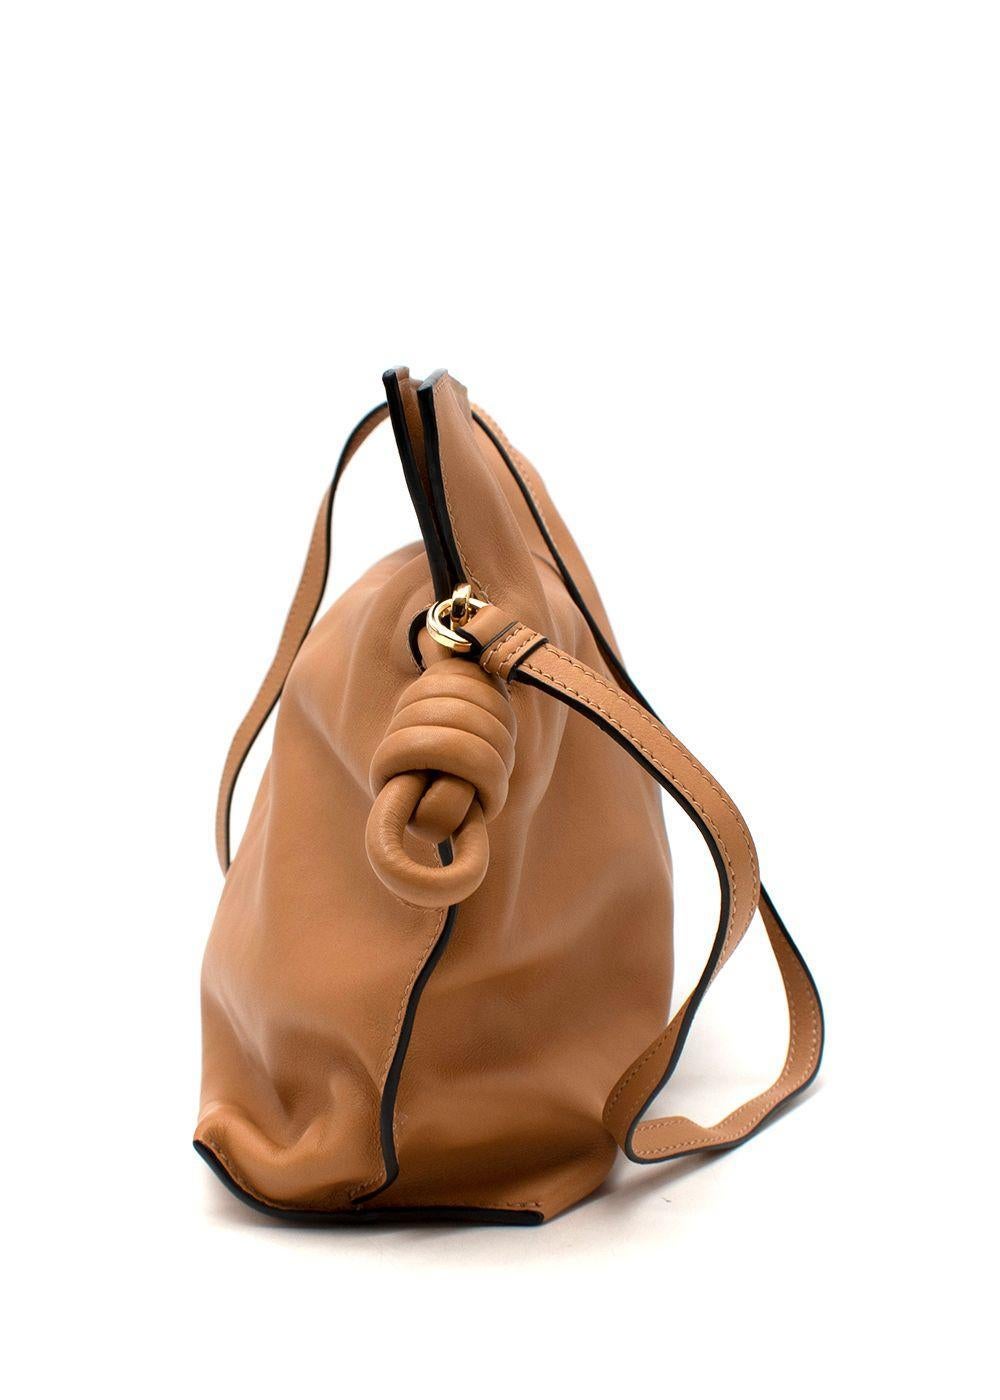 Loewe Tan Brown Leather Mini Flamenco Knot Clutch Bag In New Condition For Sale In London, GB